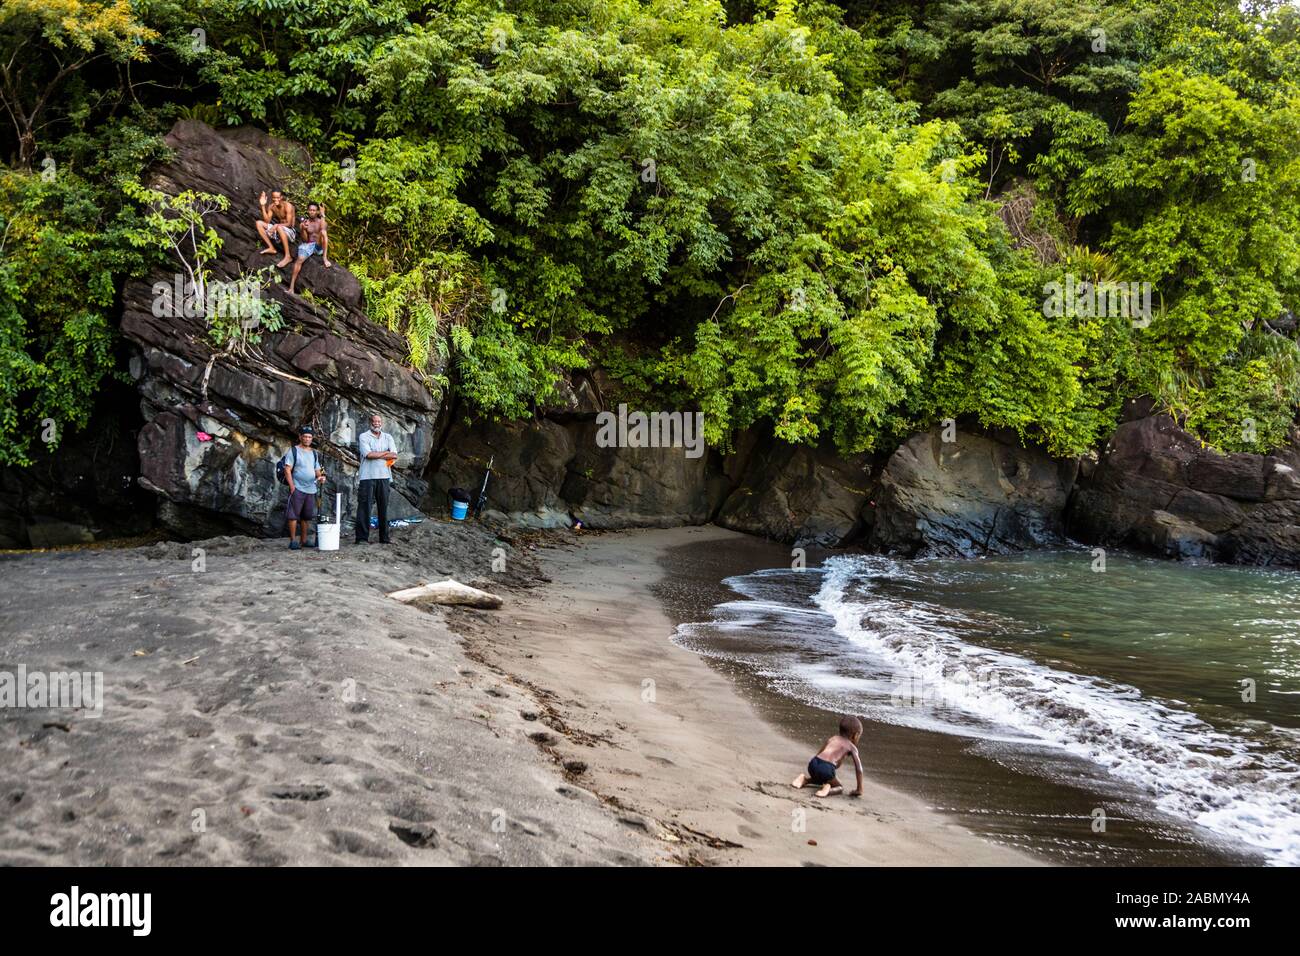 Hash House Harriers Running Event in Happy Hill, Grenada Foto Stock